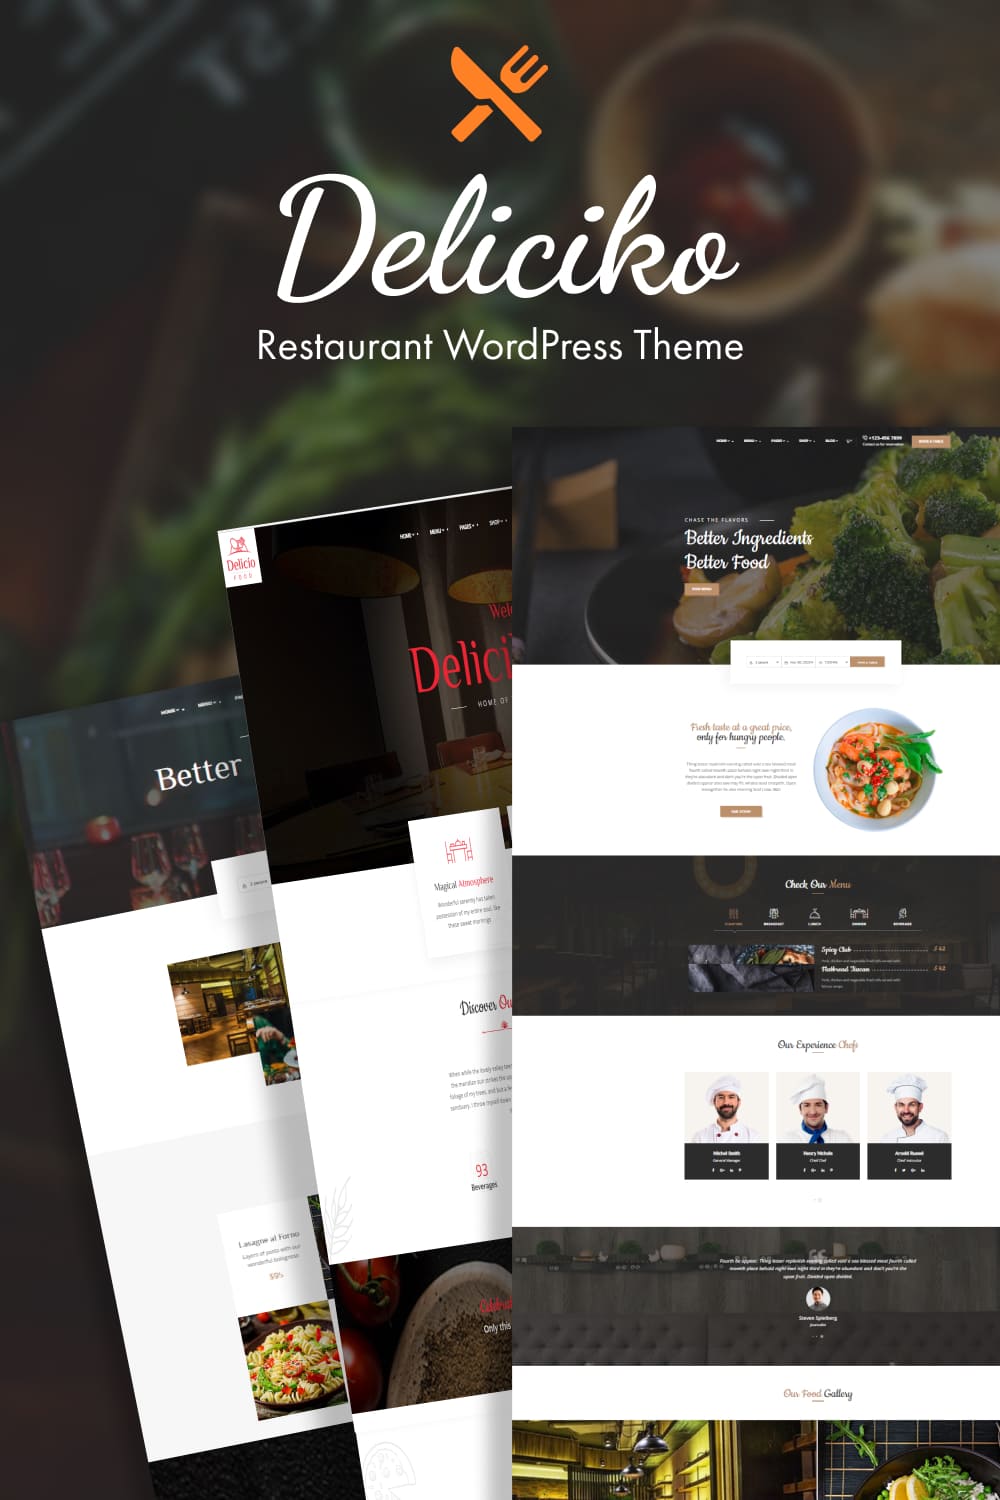 A pack of exquisite images of WordPress pages on a restaurant theme.